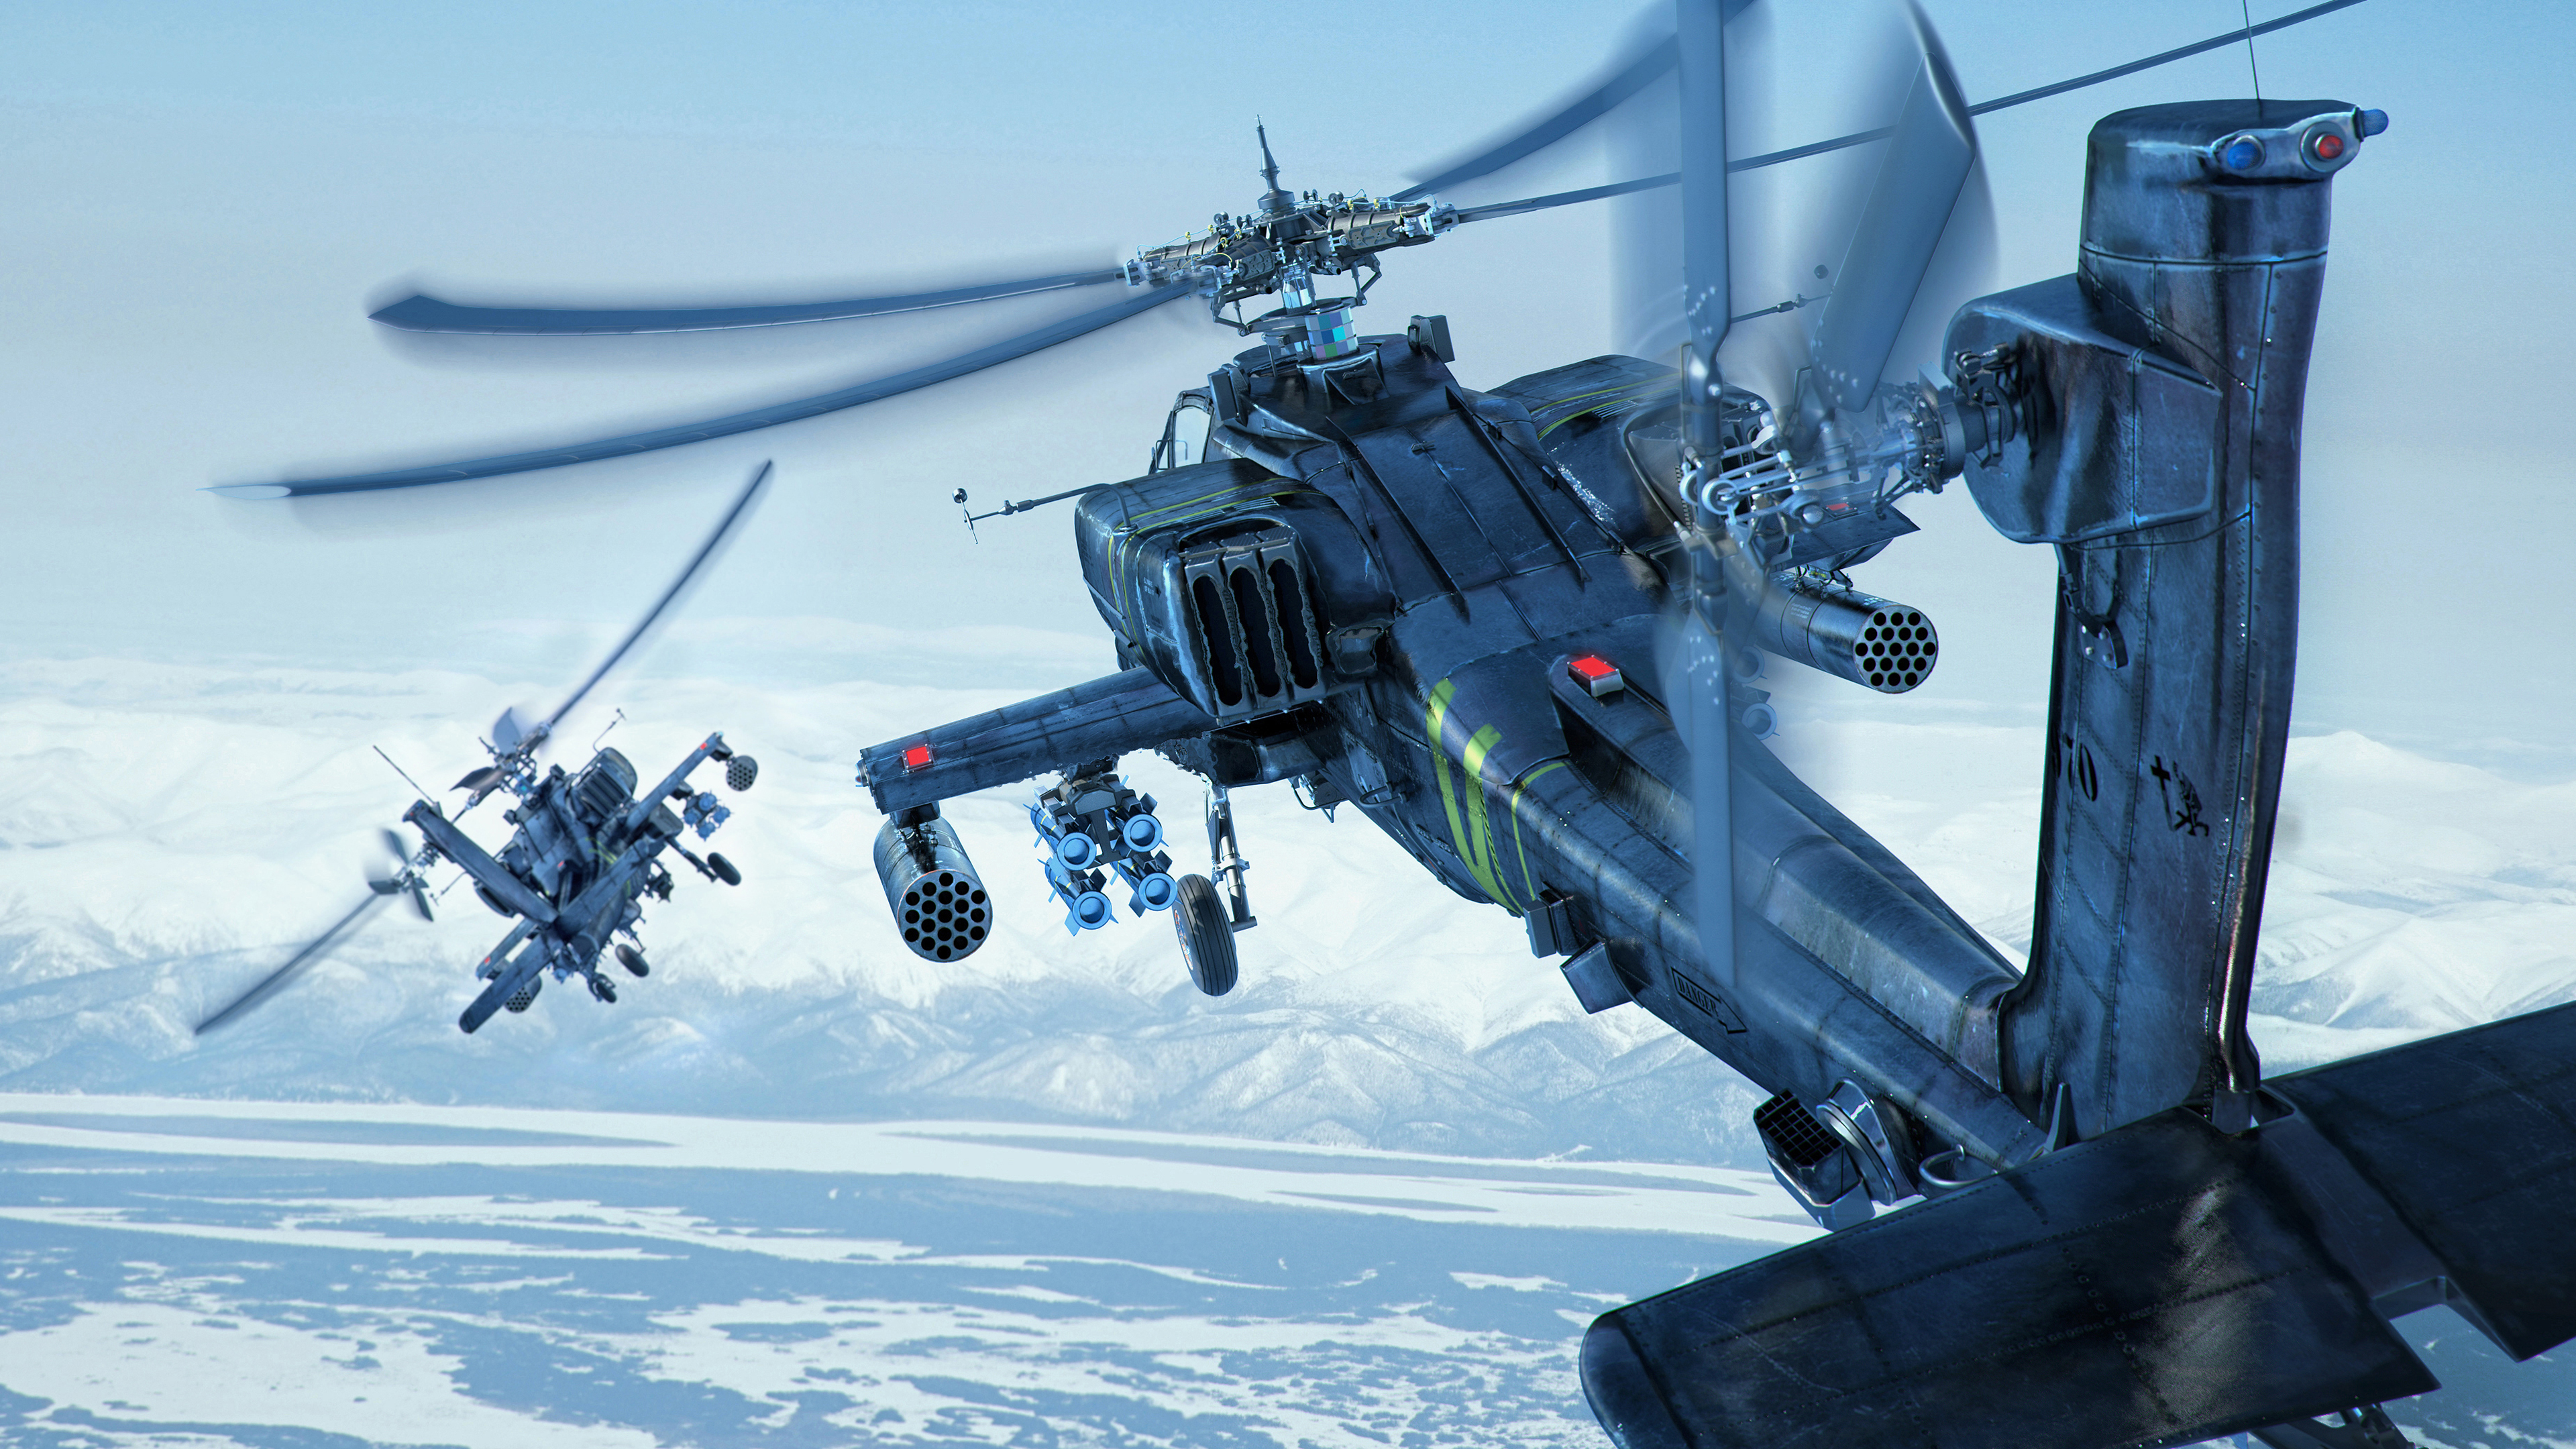 Helicopters Boeing Ah 64 Apache Ah 64 Apache Wallpapers Hd Images, Photos, Reviews